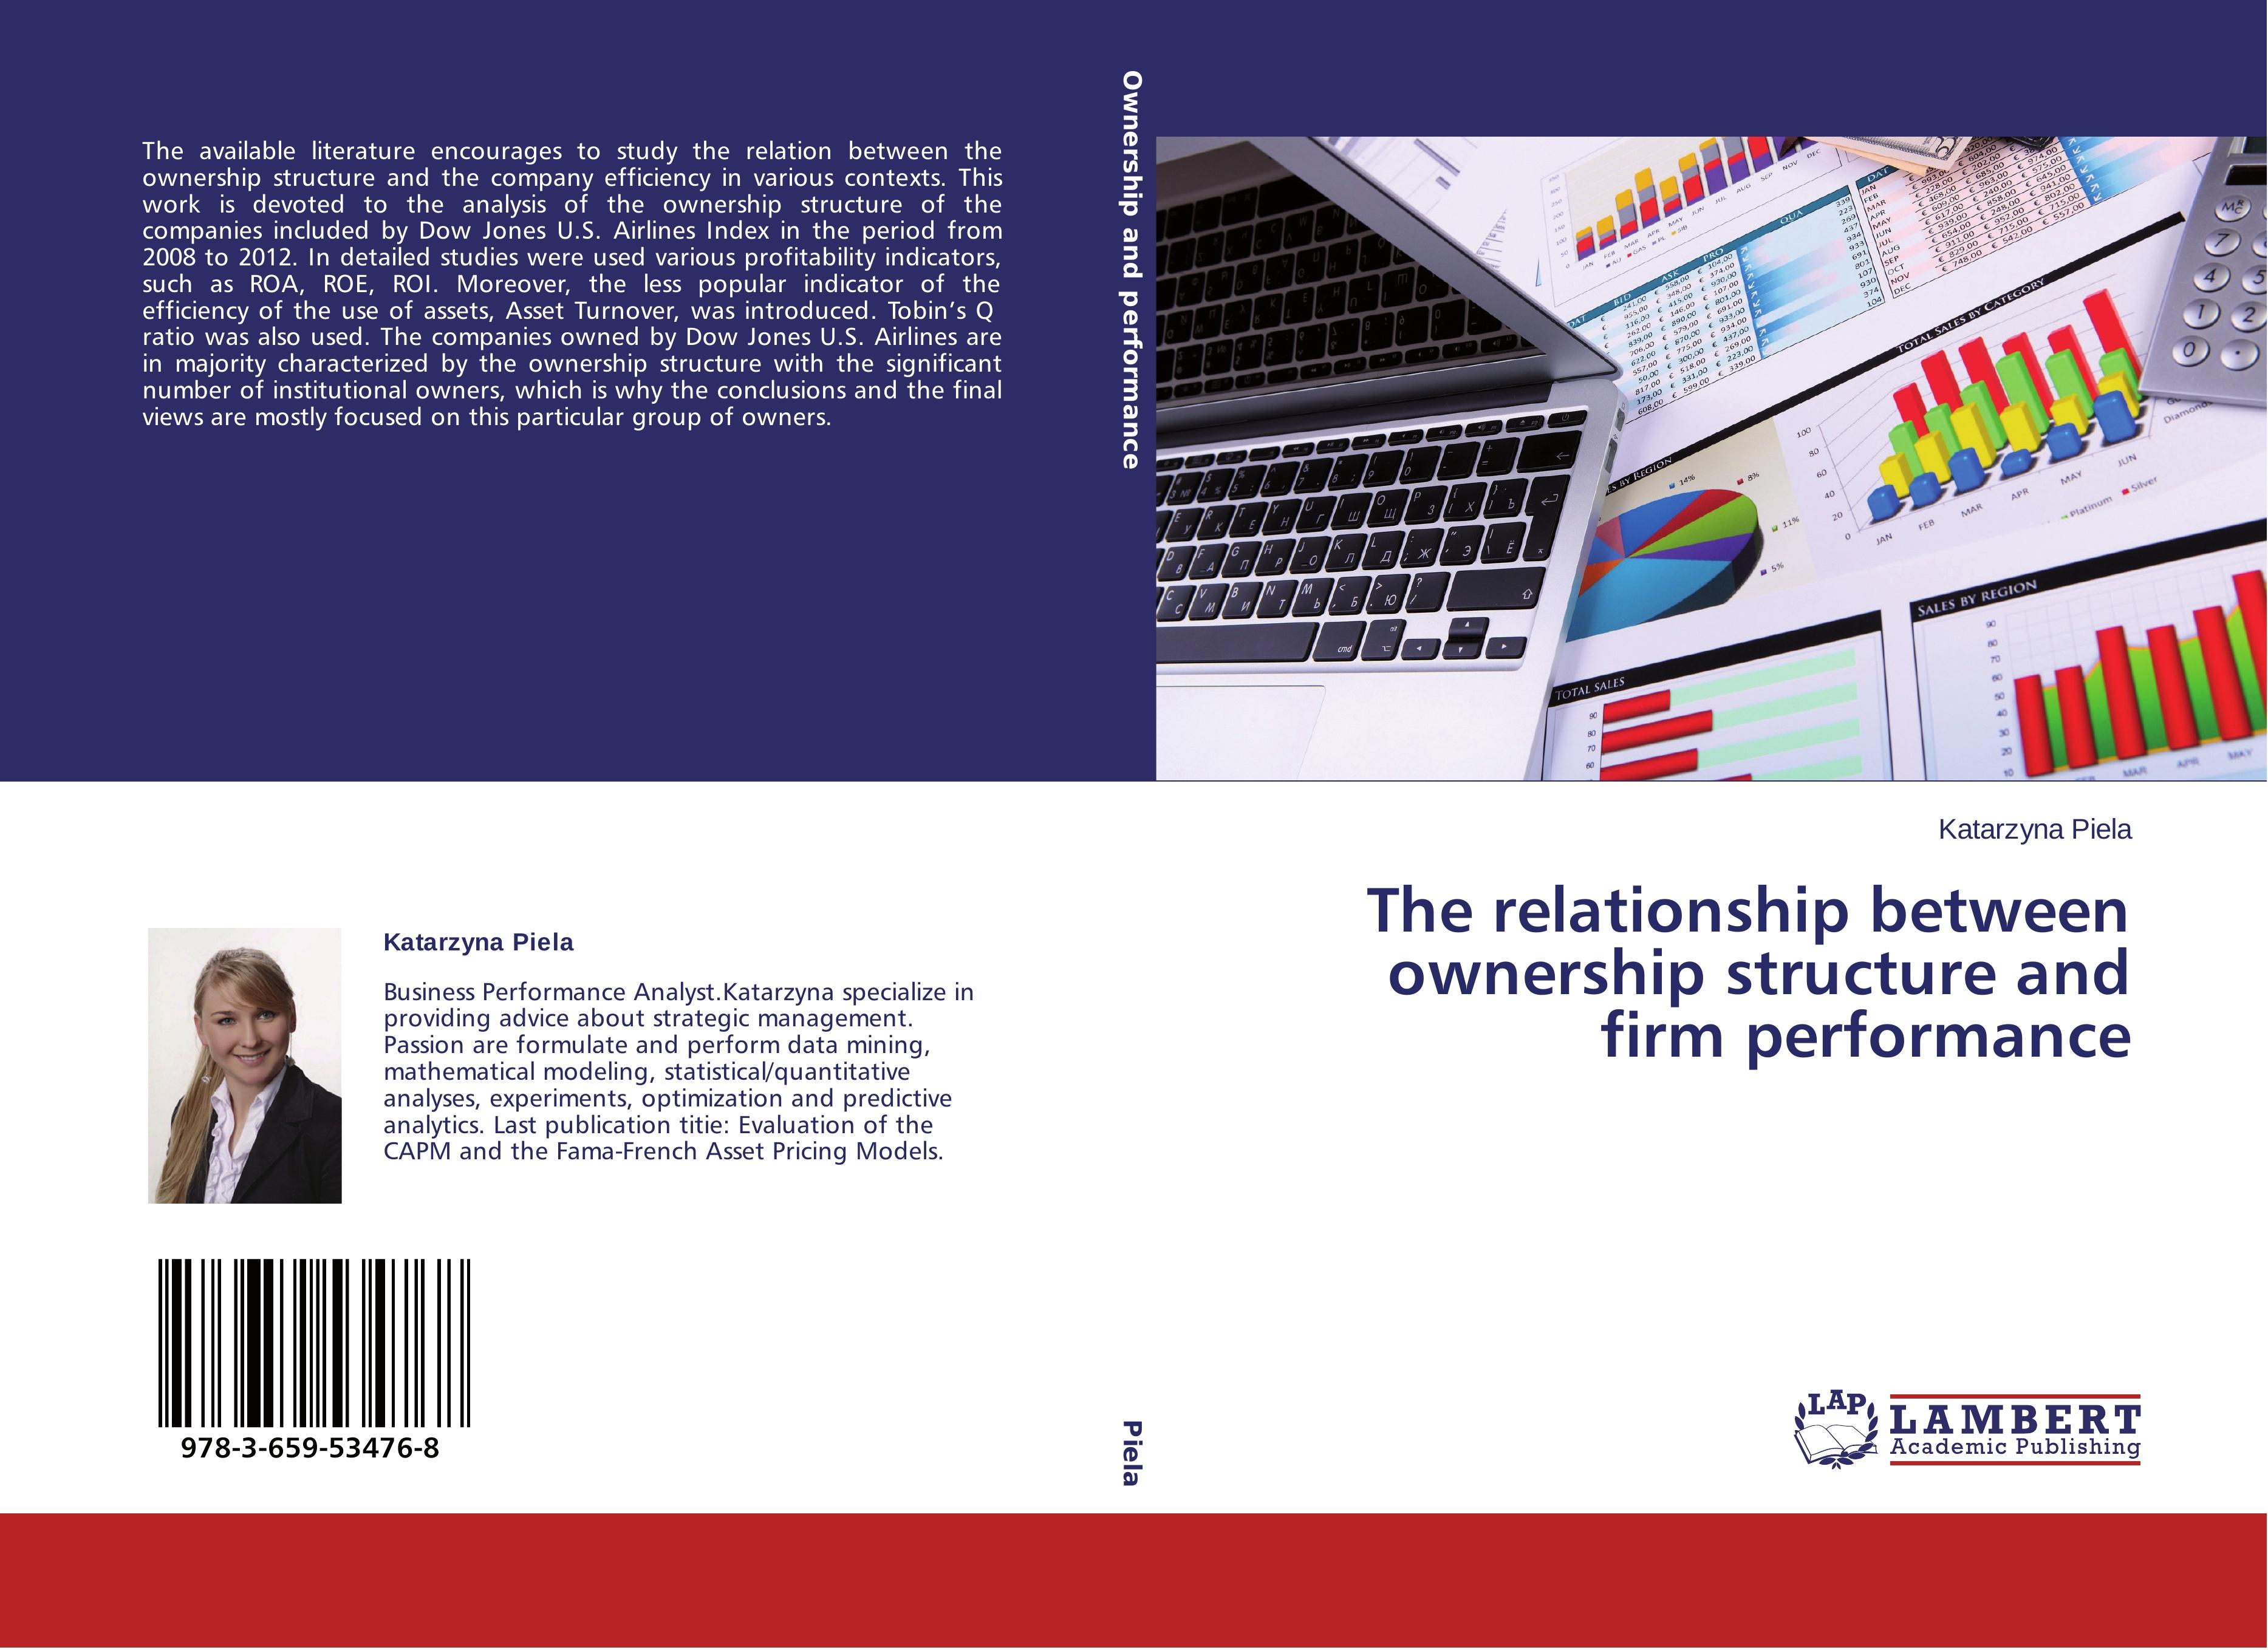 The relationship between ownership structure and firm performance - Piela, Katarzyna